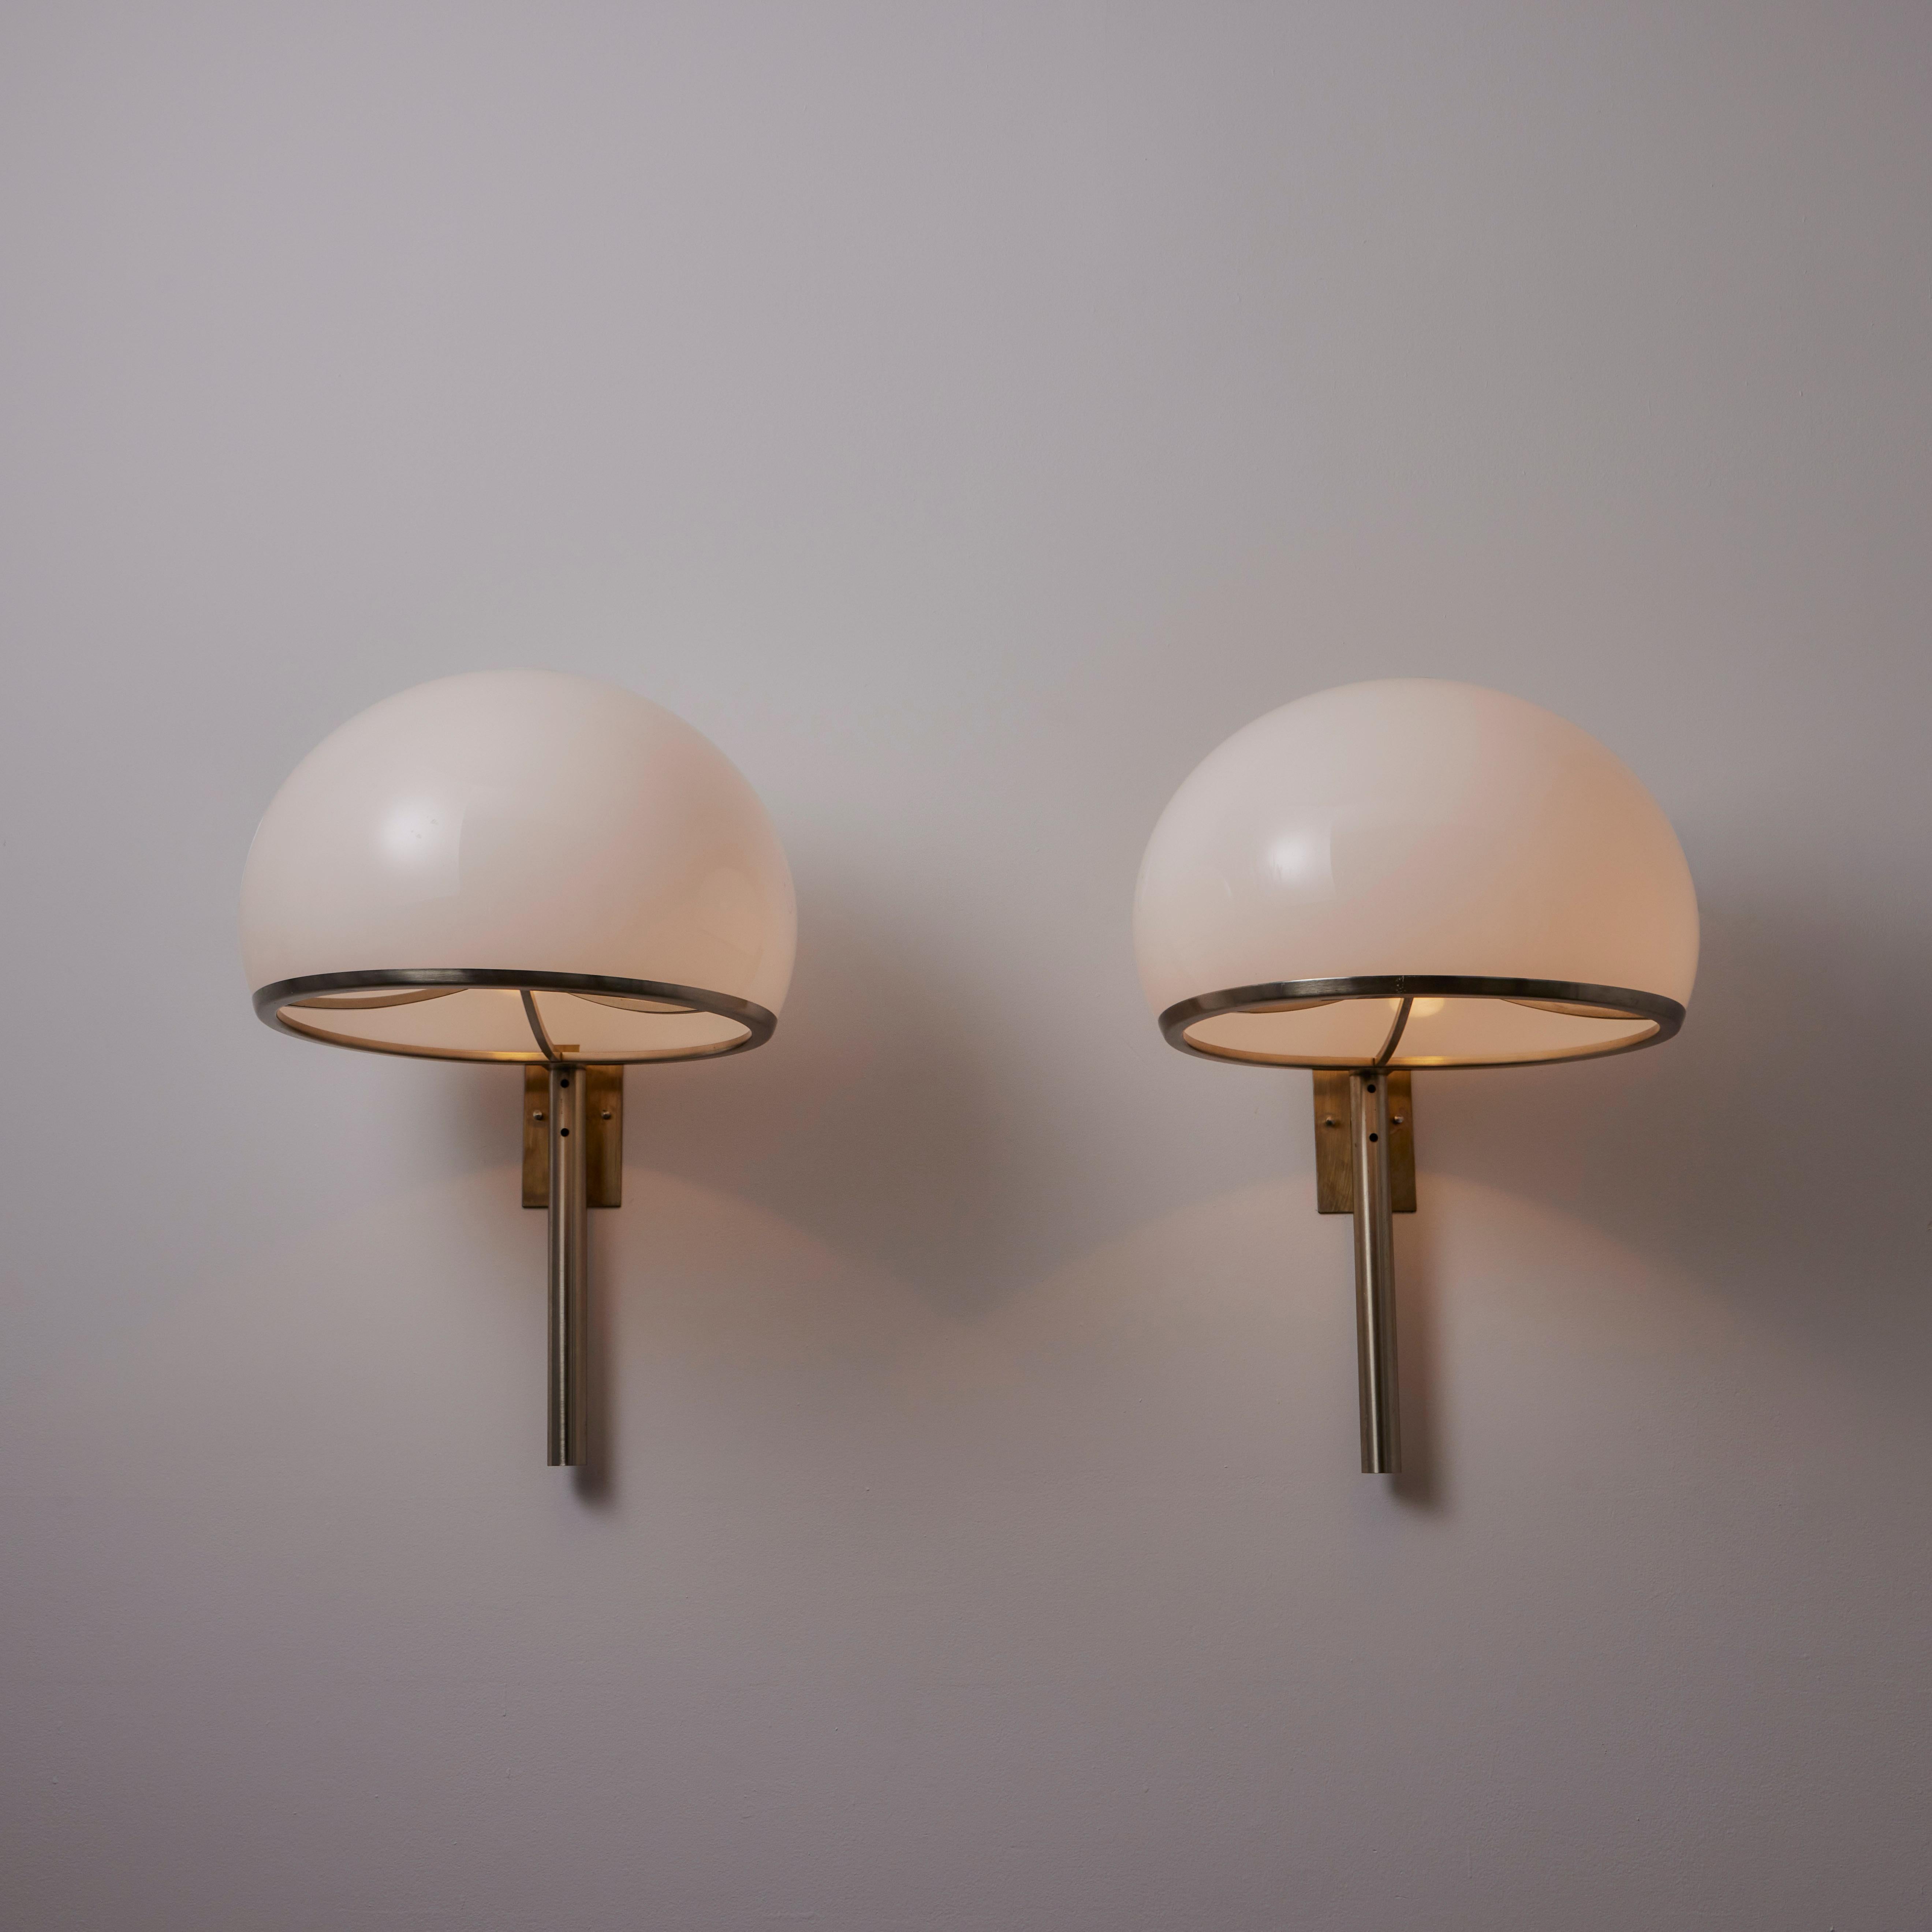 XL Mod. 252/p Sconces by Vittorio Gregotti, Lodovico Meneghetti, and Giotto Stoppino for Arteluce. Designed and manufactured in Italy, in 1966. Large wall lamps comprising of silver patinated brass mounting bodies and acrylic dome diffusers. The